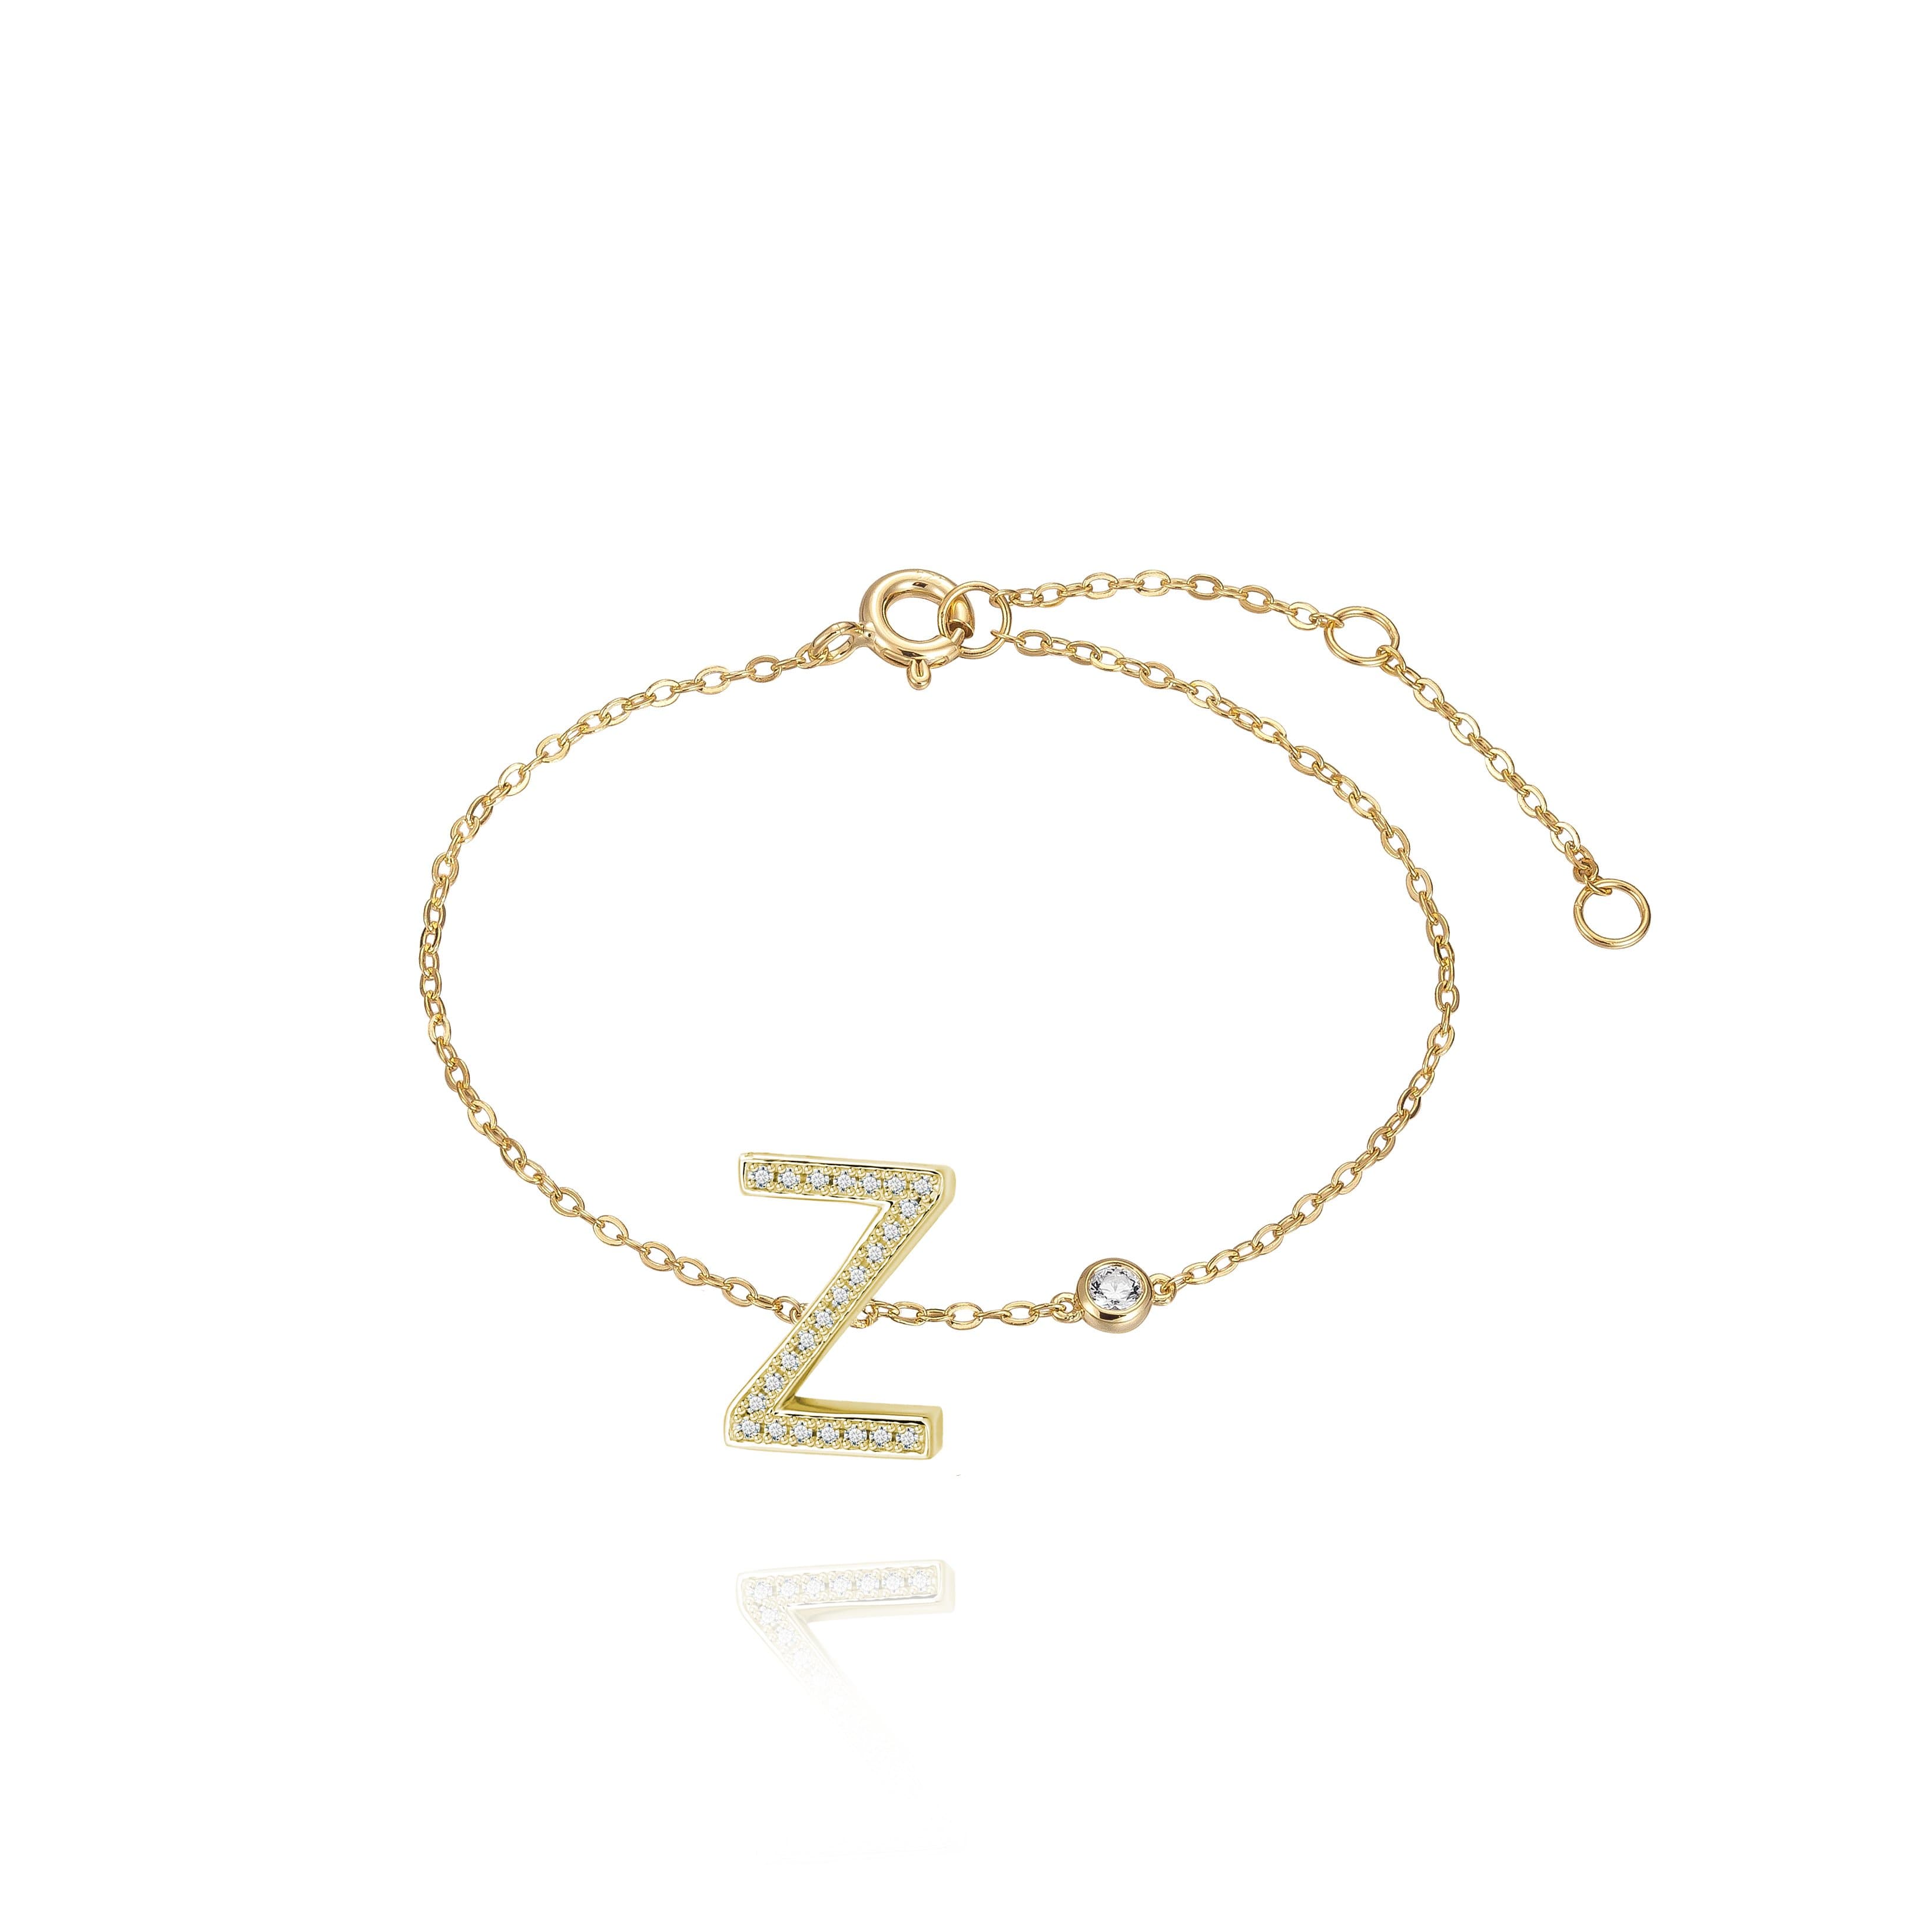 Z Initial Bezel Chain Bracelet Adjustable Size 5.5 - 8 (Additional Sizes Available by request) / White Topaz / 24K Yellow Gold Vermeil